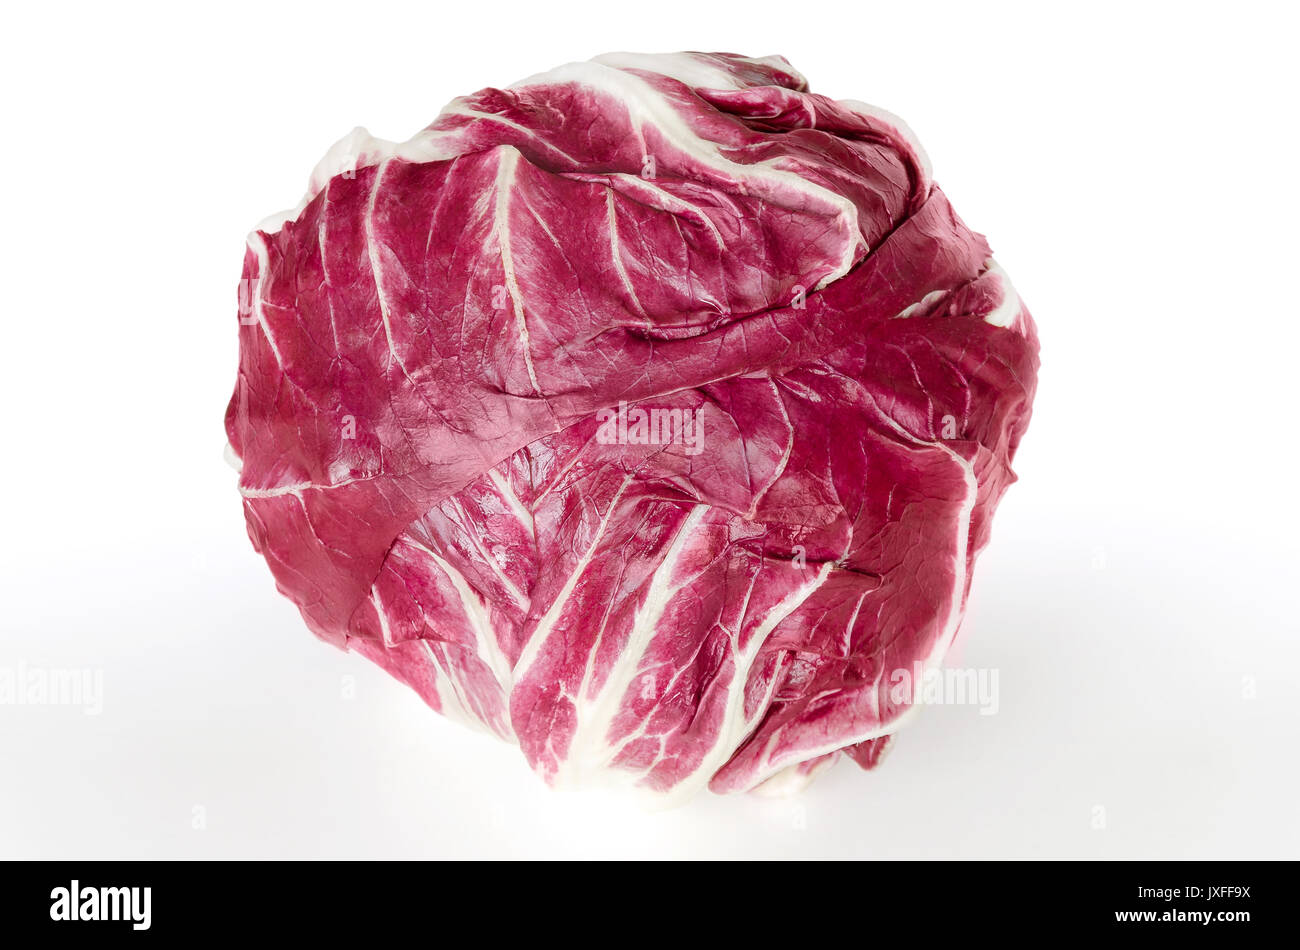 Radicchio front view over white. Italian chicory. Cultivated form of leaf chicory, Cichorium intybus. Leaf vegetable with white veined red leaves. Stock Photo